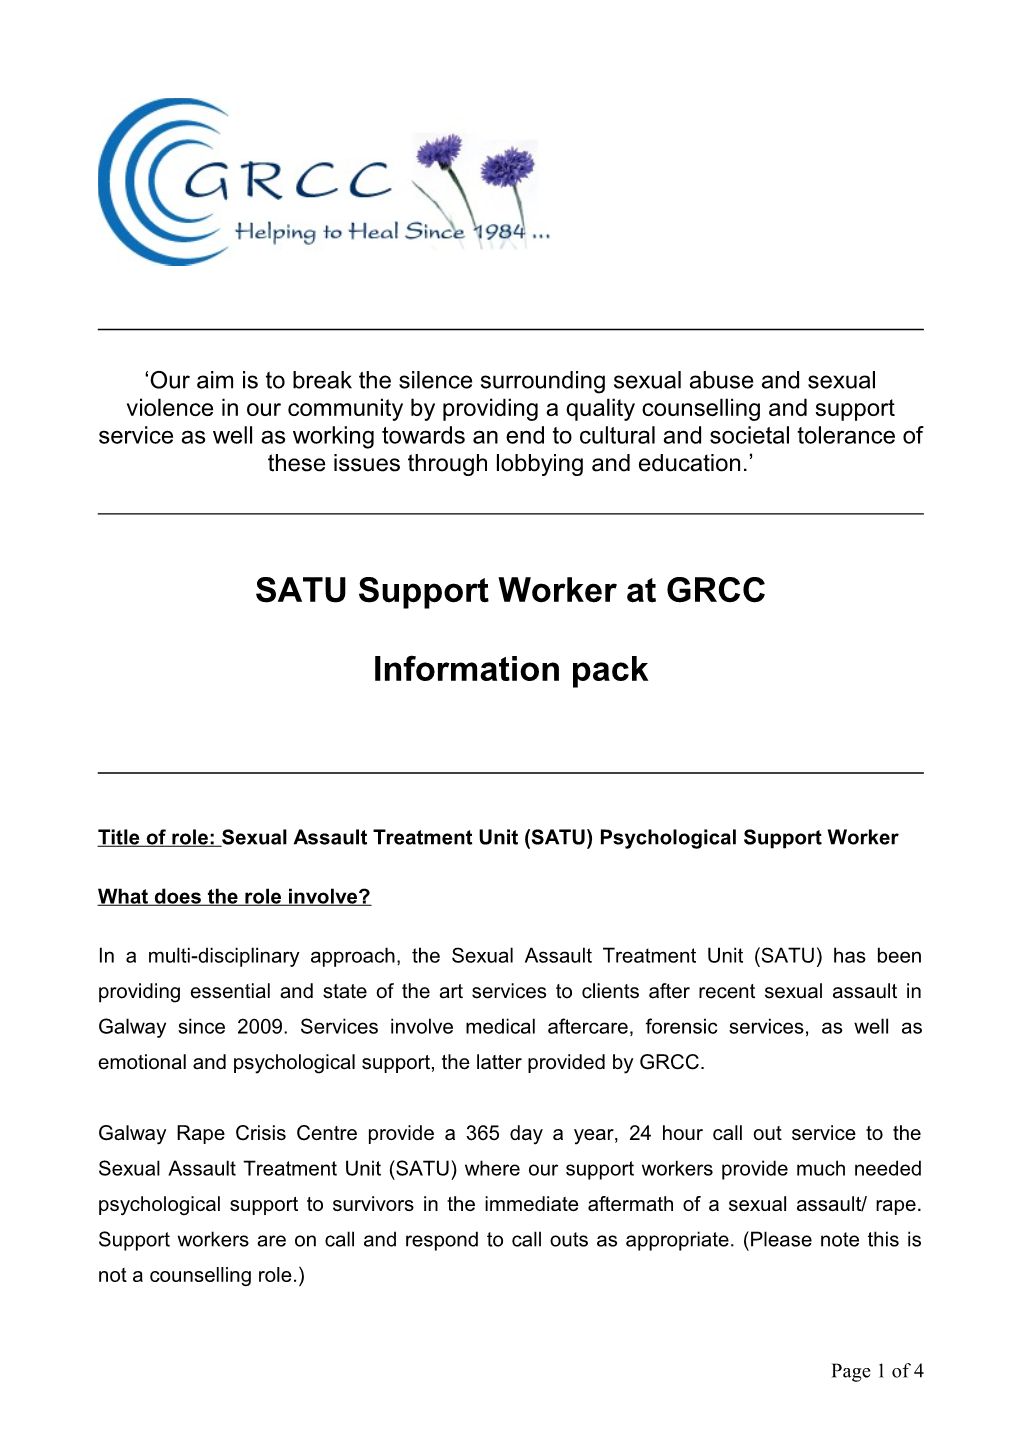 SATU Support Worker at GRCC